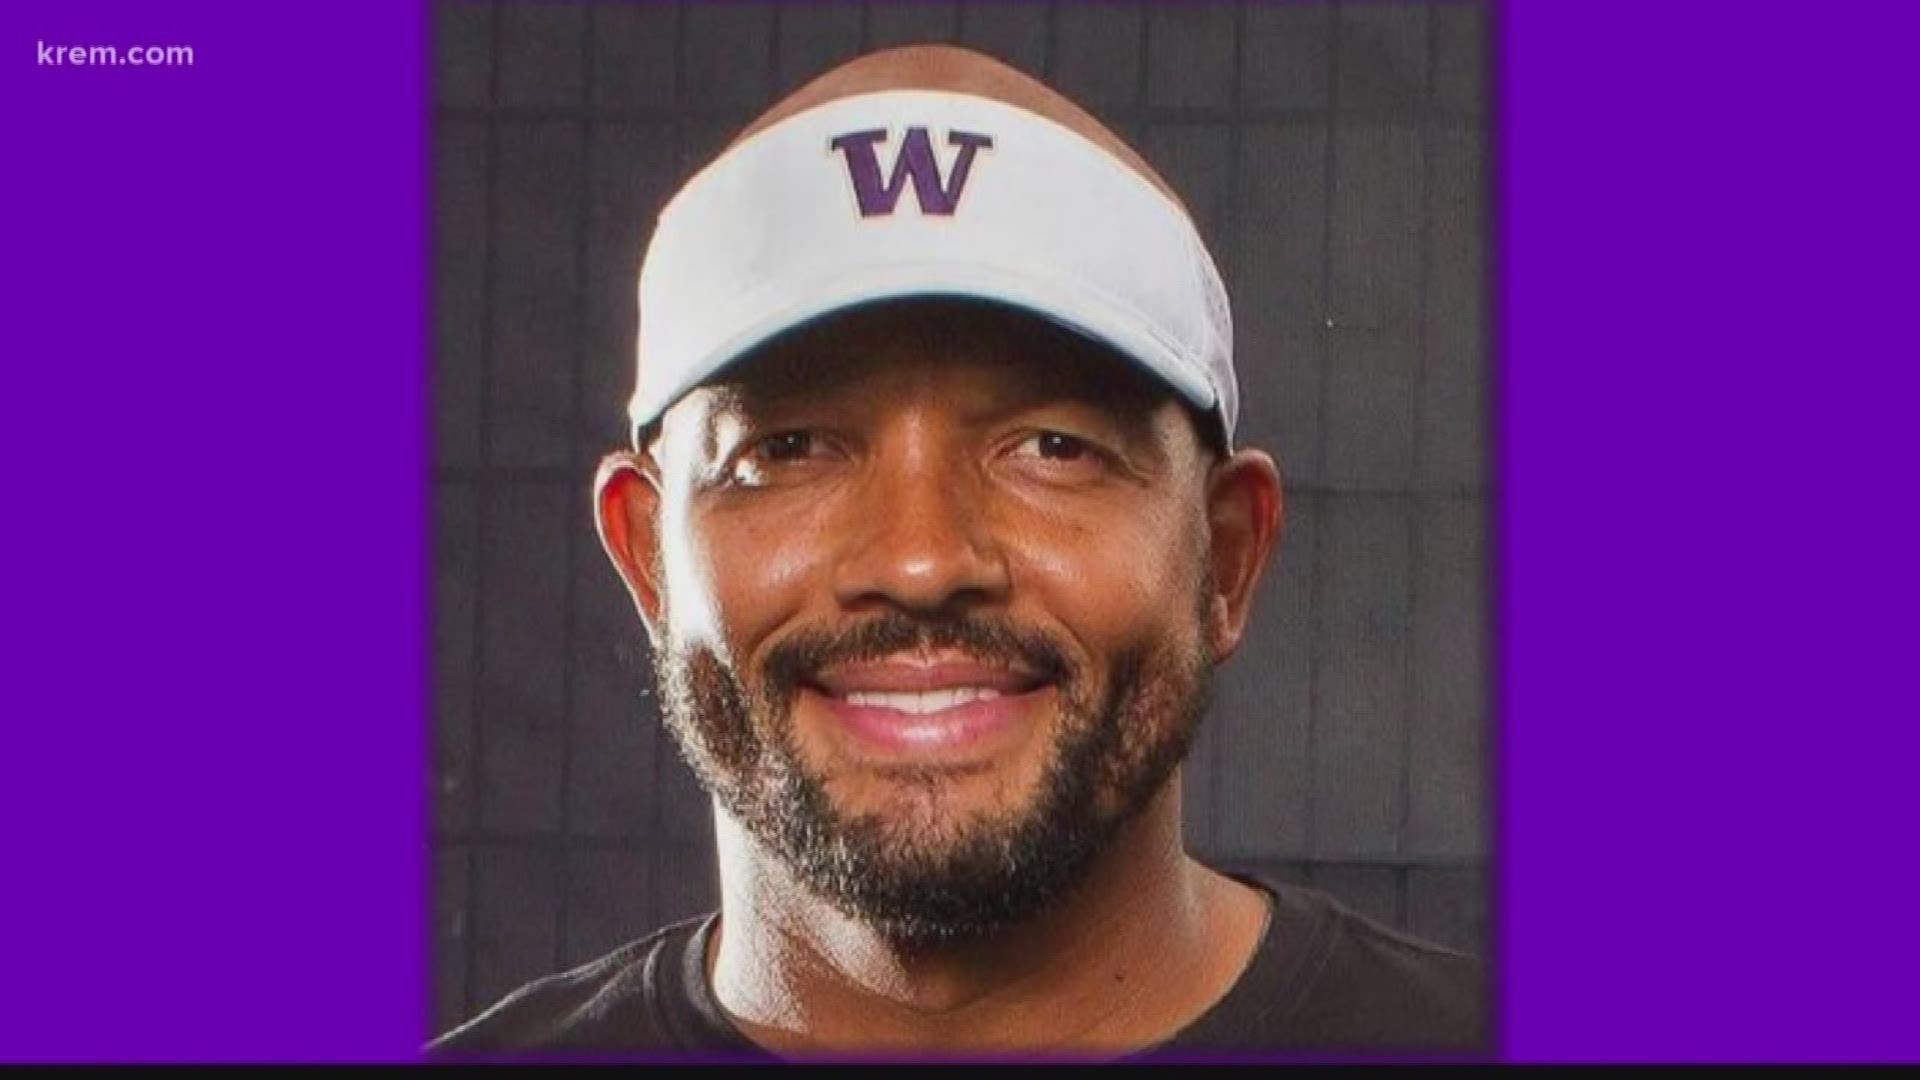 Spokane native and UW Huskies defensive coordinator Jimmy Lake will be the new Huskies head coach after Chirs Petersen announced he will be stepping down.